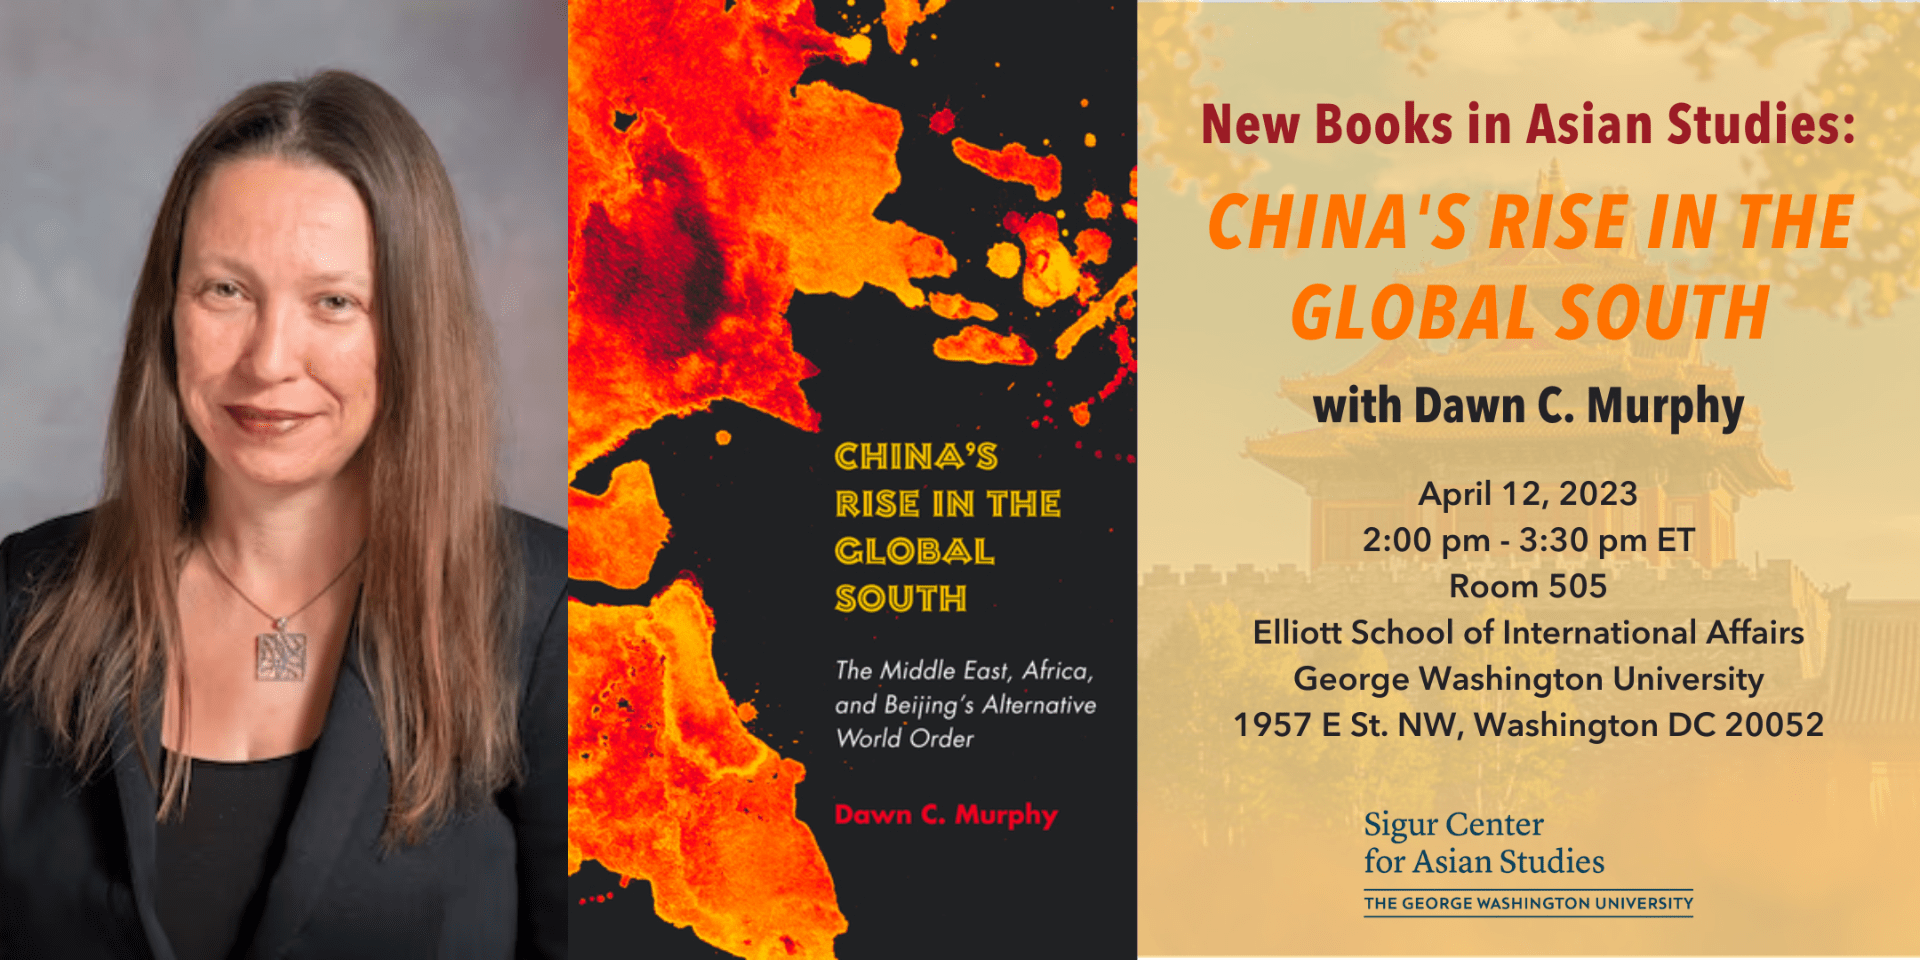 A graphic for "China's Rise in the Global South"